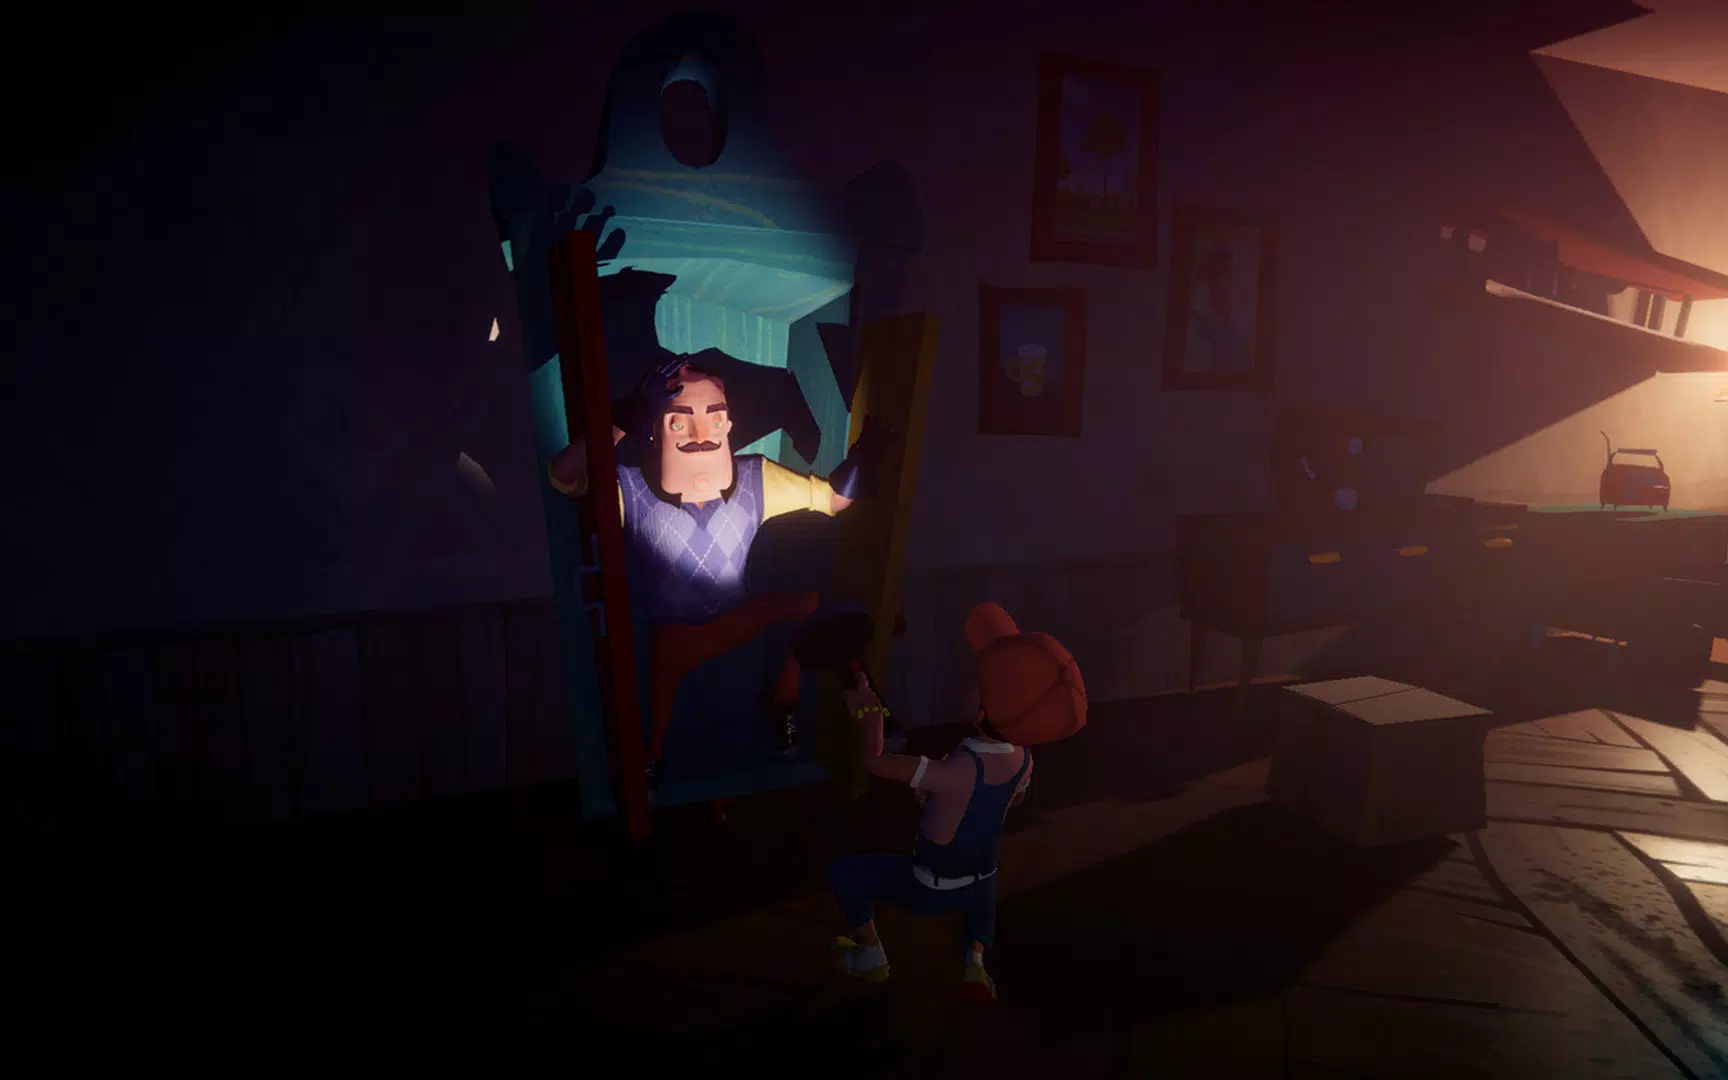 Secret Neighbor Apk For Android Download Free Latest Version